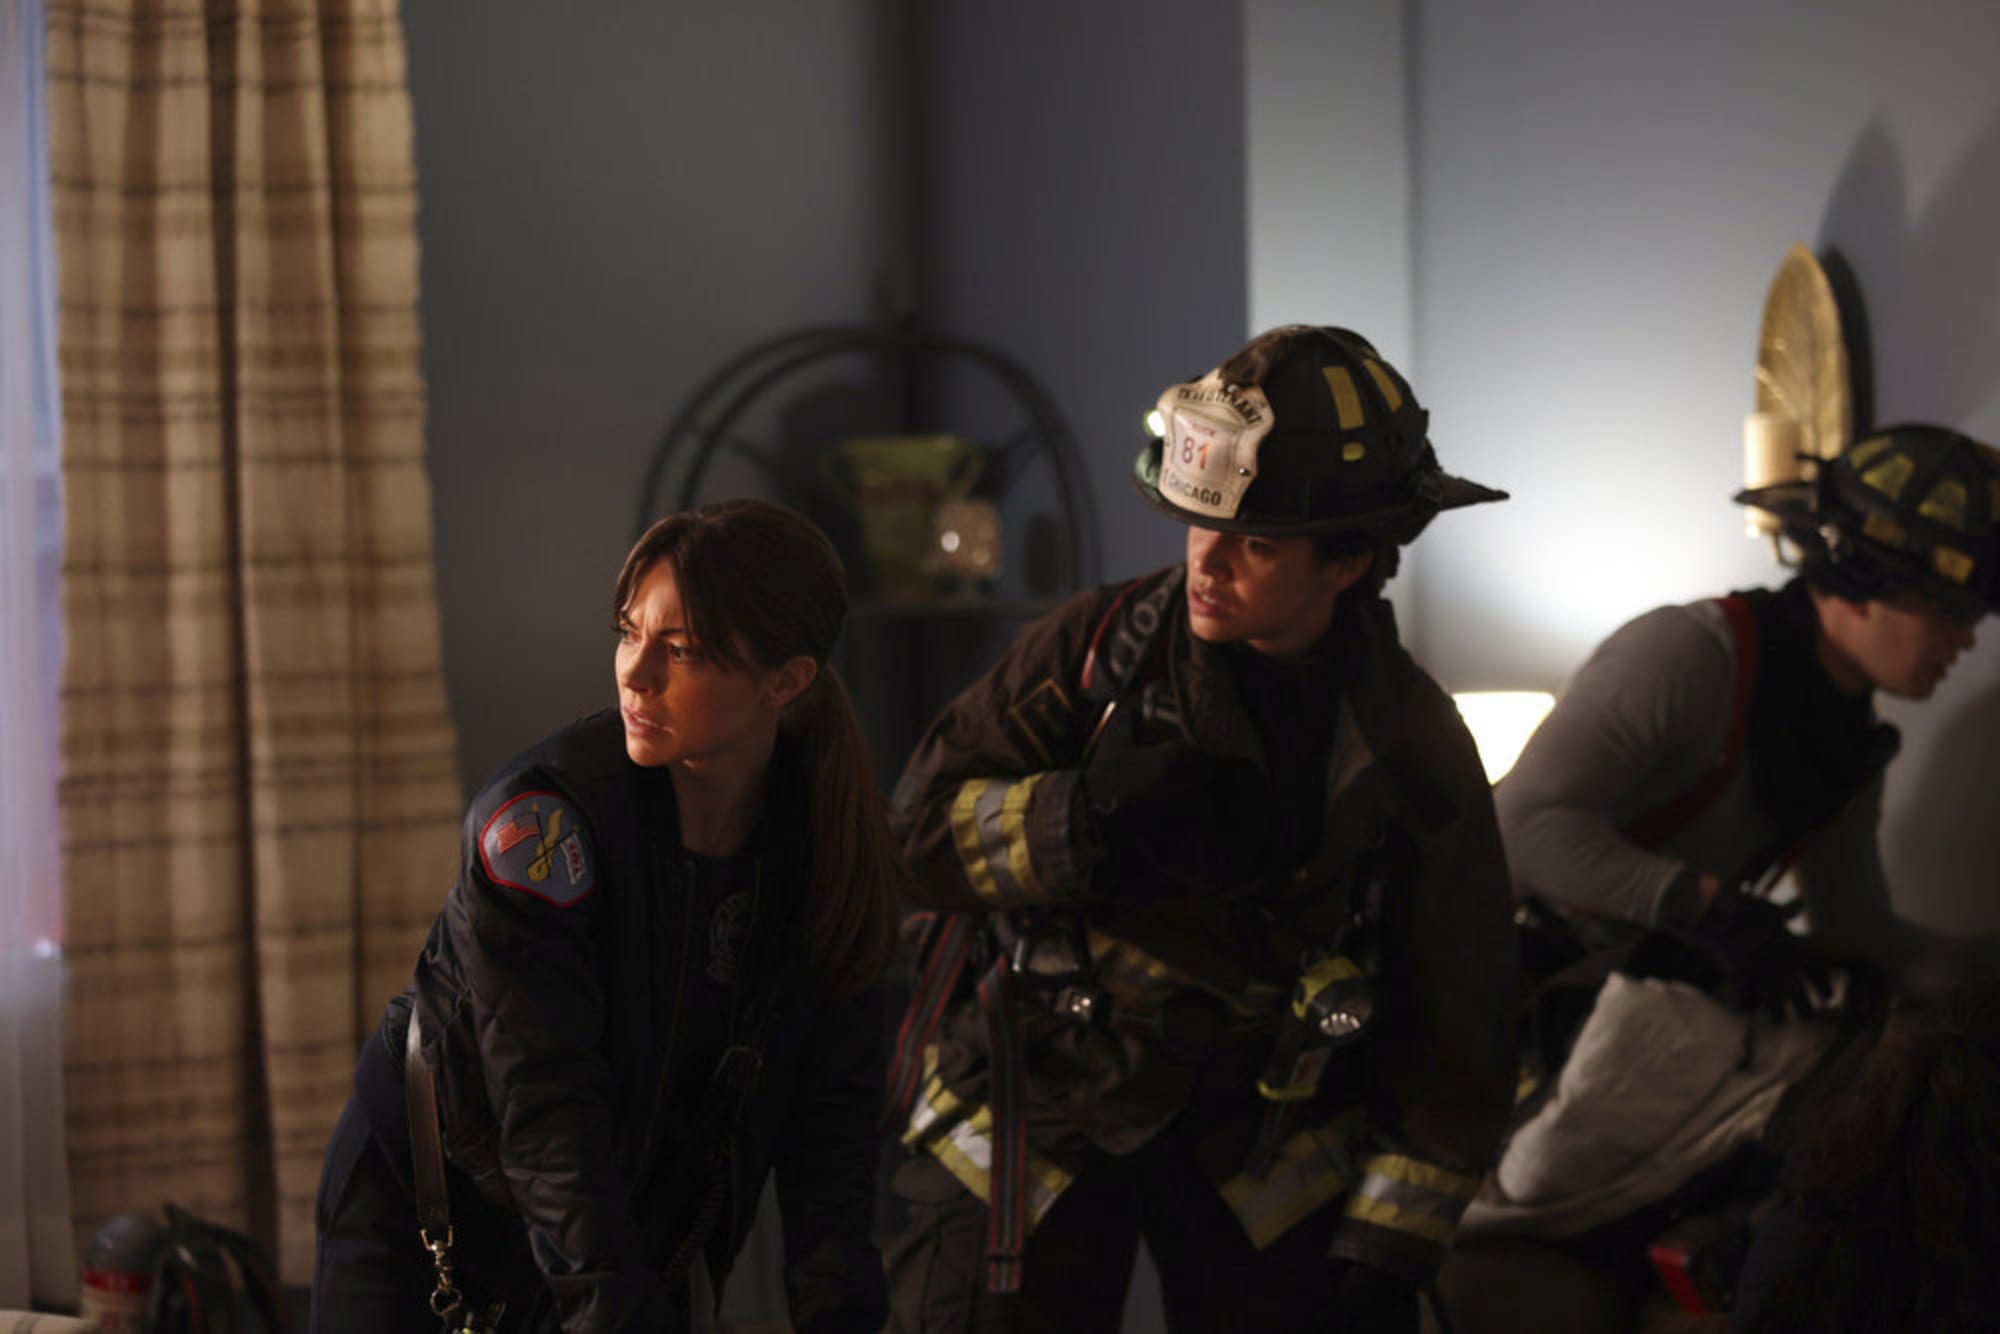 Chicago Fire: When is the season 11 release date?